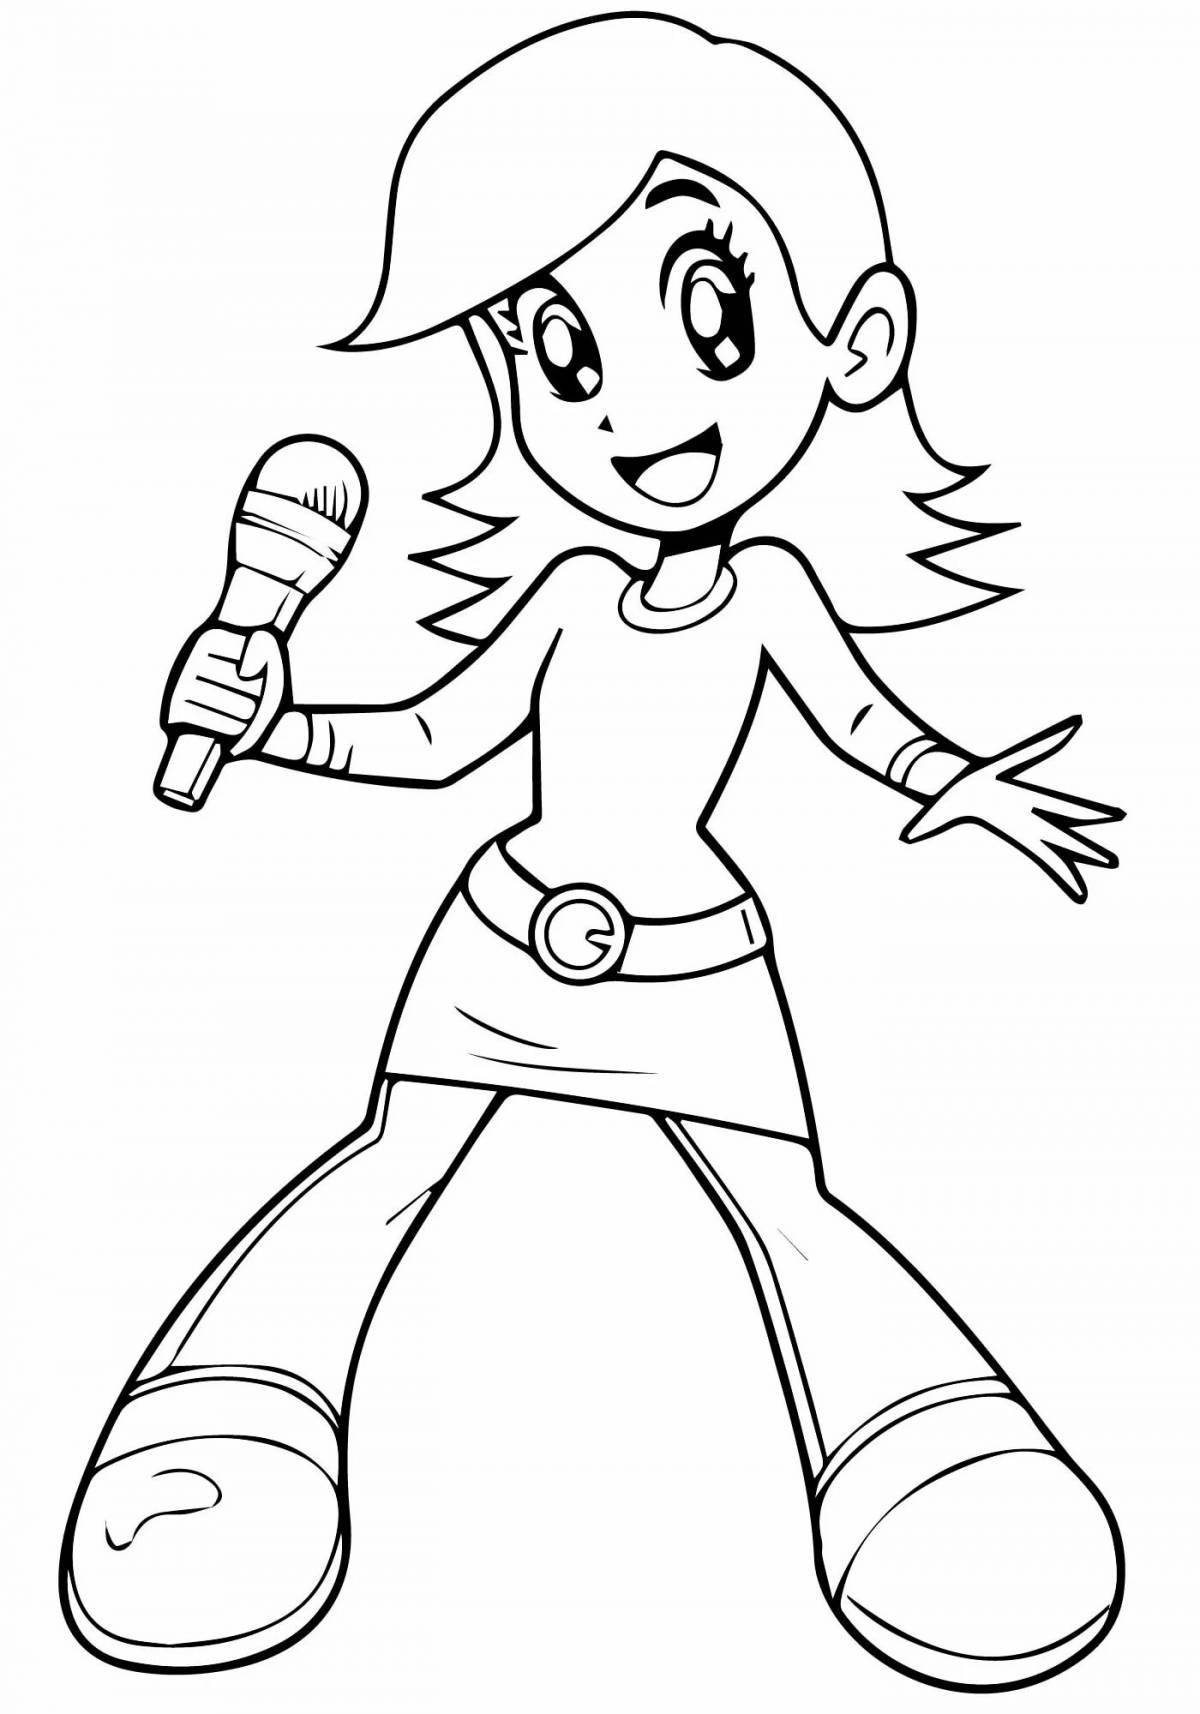 Coloring page cheering singer for kids